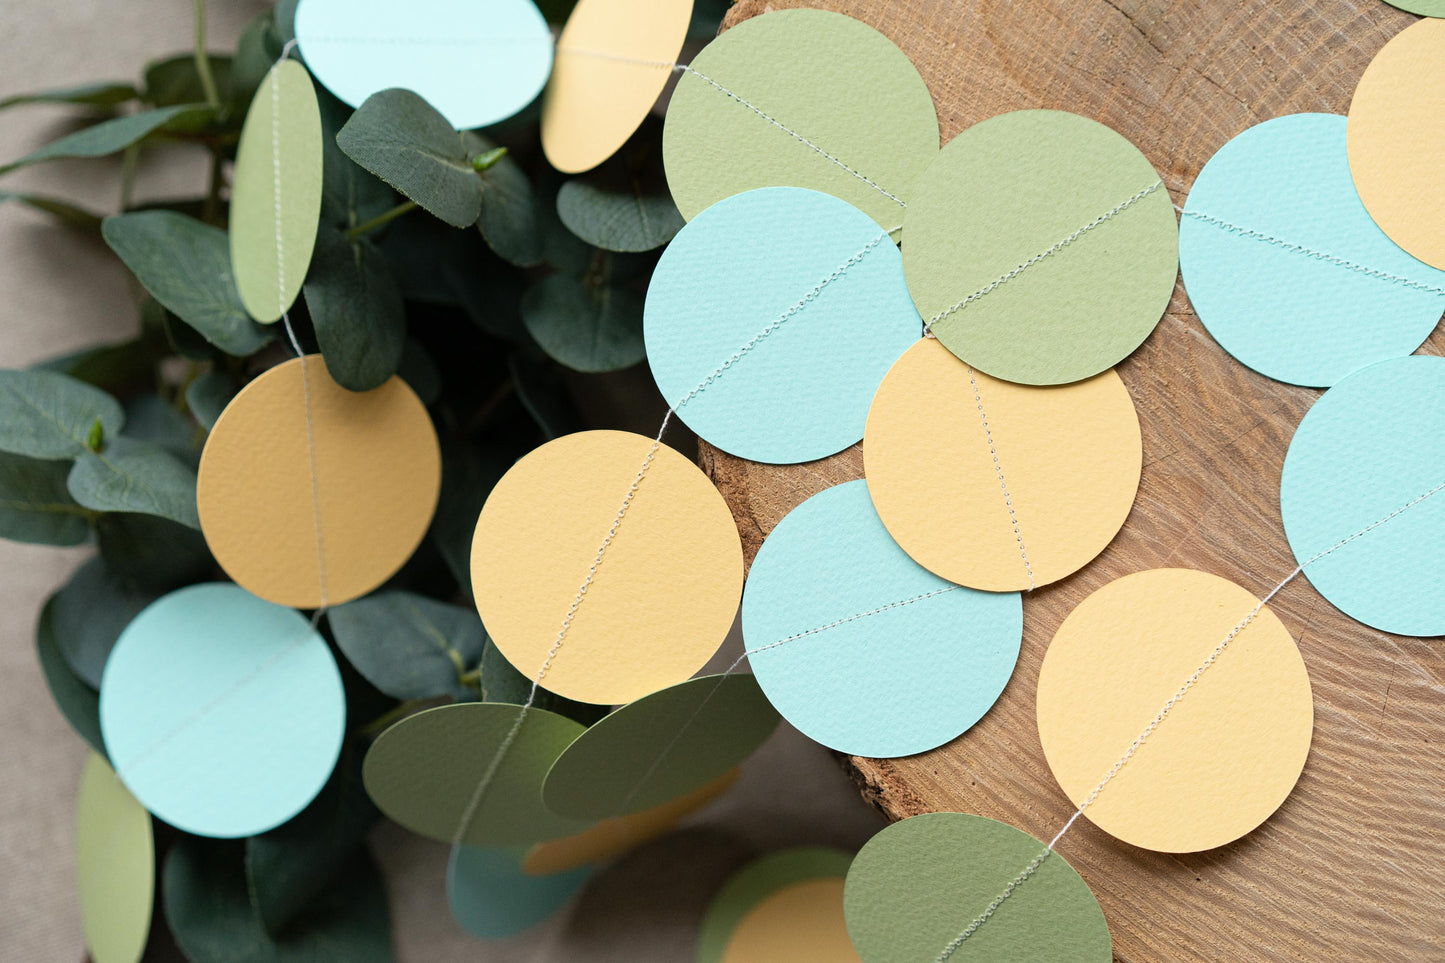 Bunny Turquoise Paper Garland